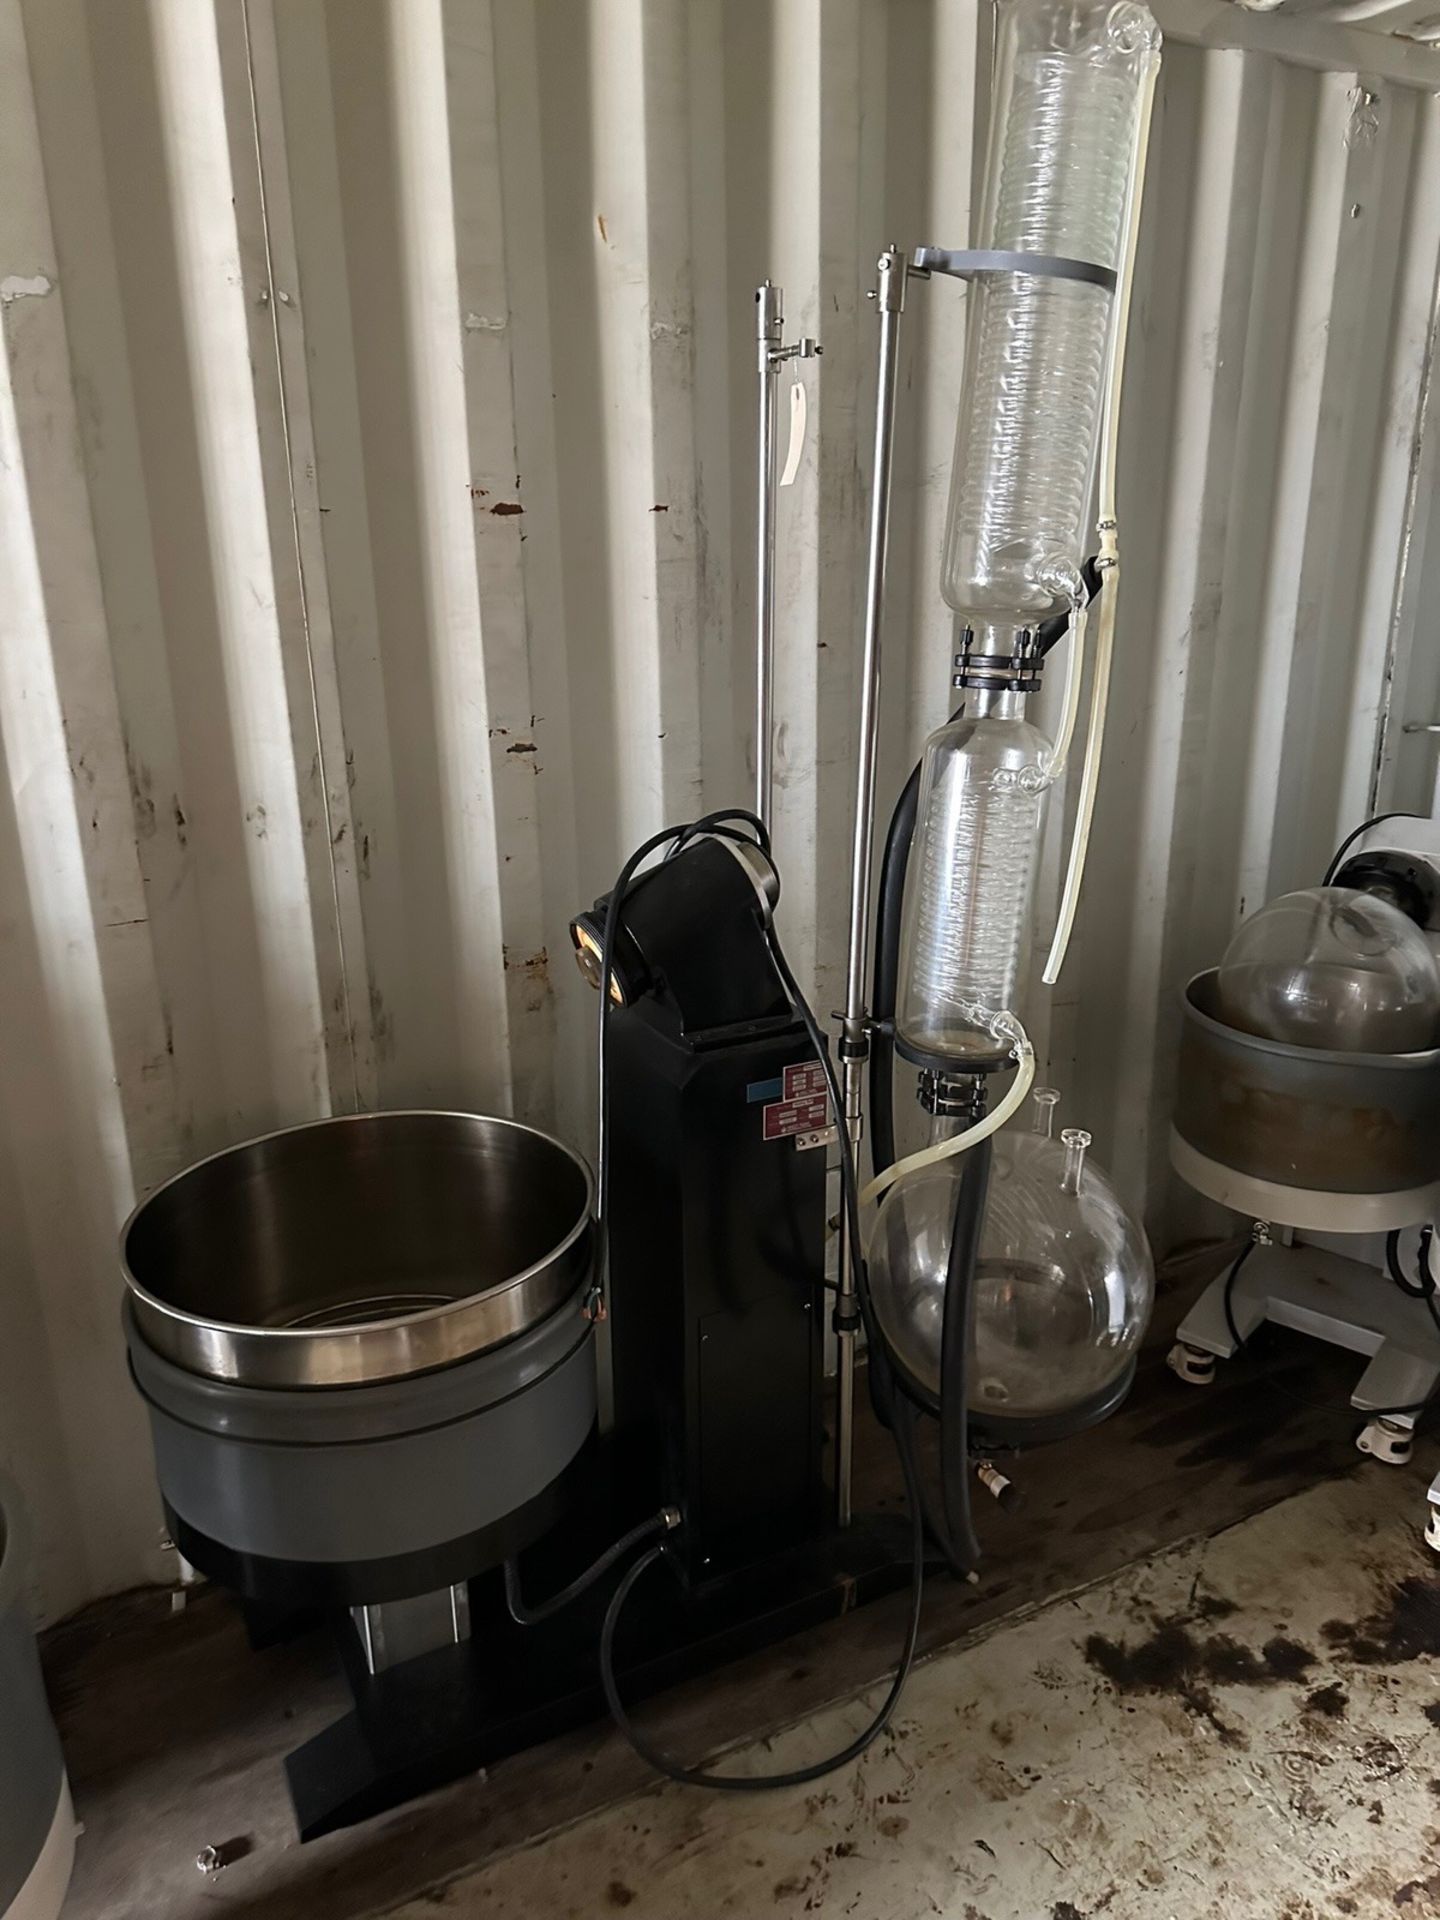 West Tune Extraction, Rotary Evaporator, Model WTRE-50 | Rig Fee $250